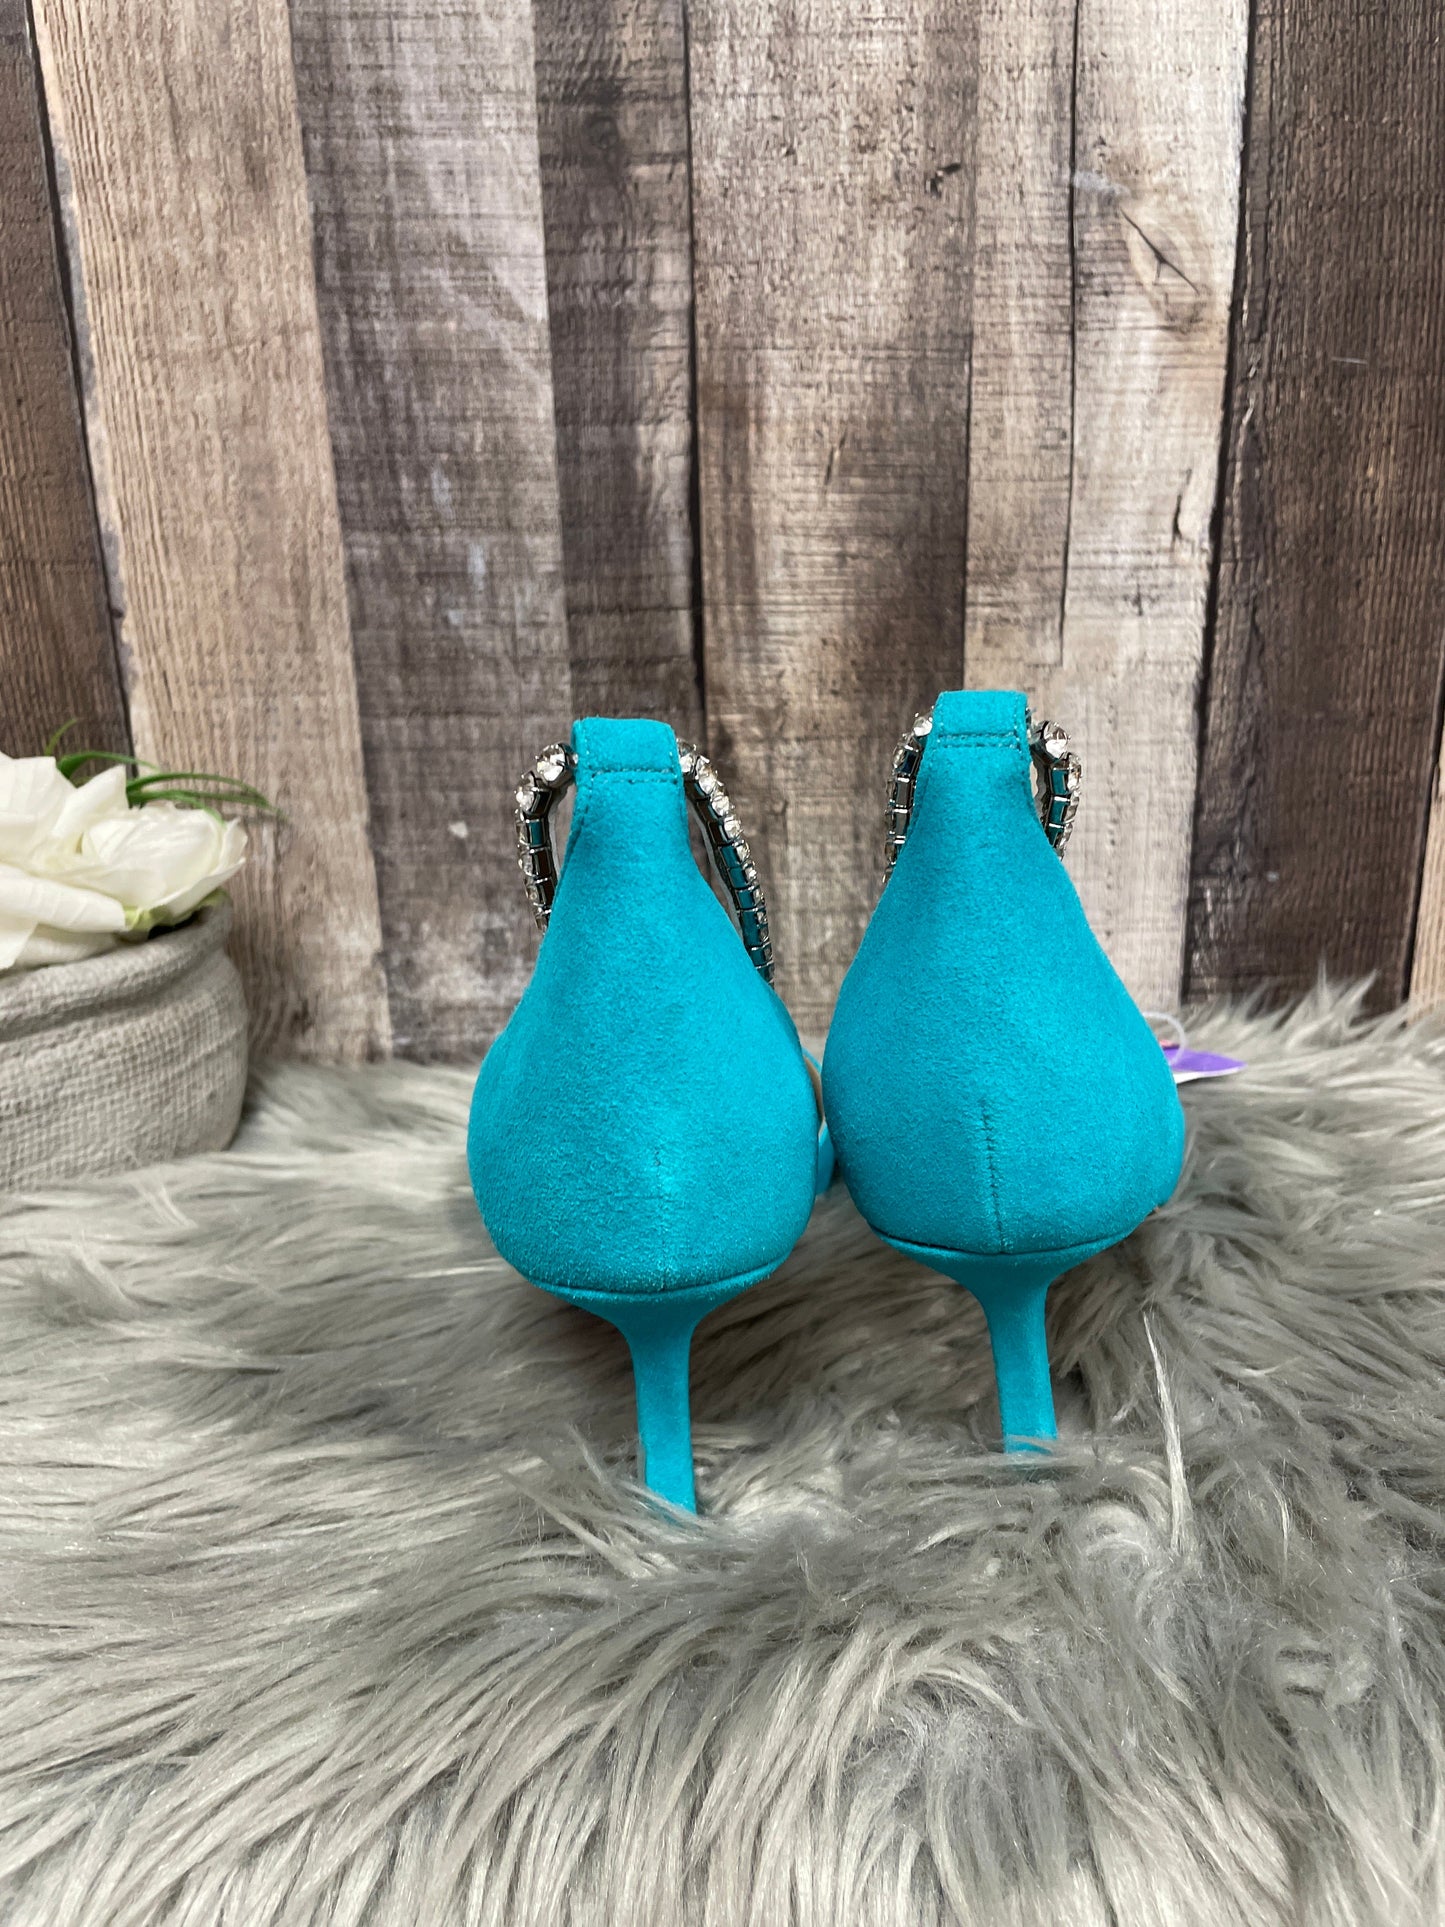 Teal Sandals Heels Stiletto Vince Camuto, Size 11